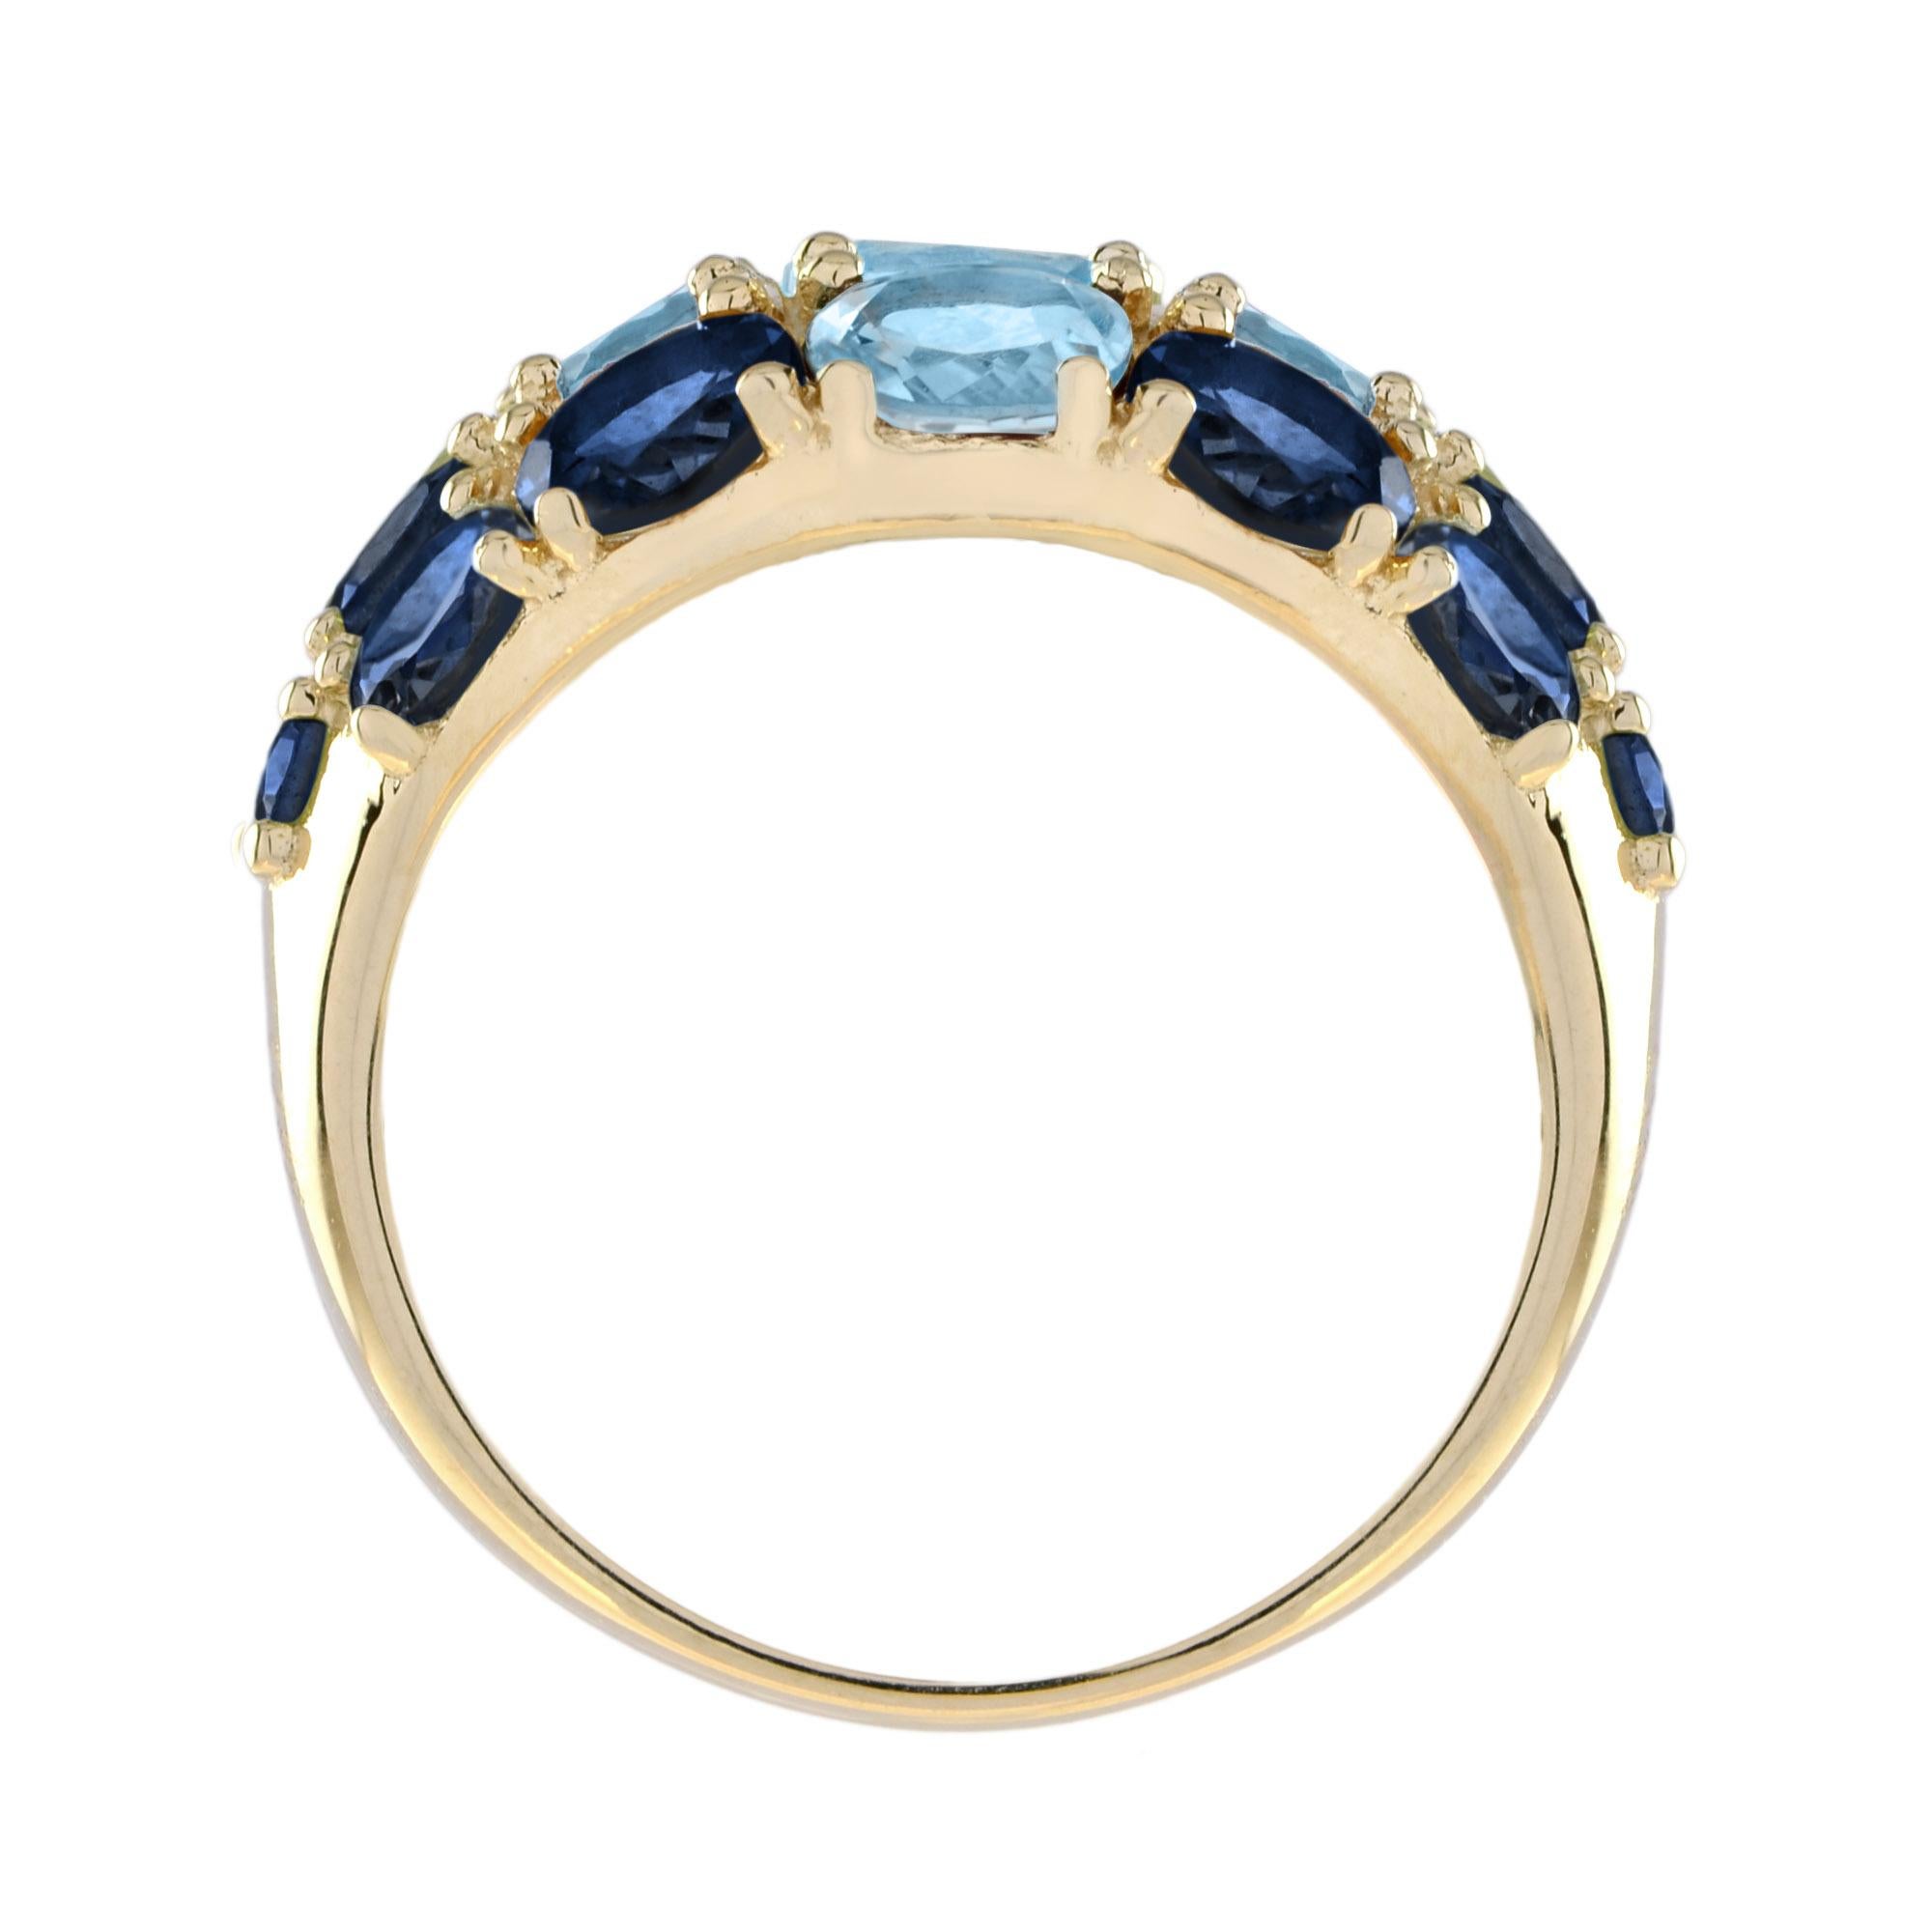 For Sale:  Vintage Style Blue Topaz and Sapphire Cocktail Ring in 14K Yellow Gold 5